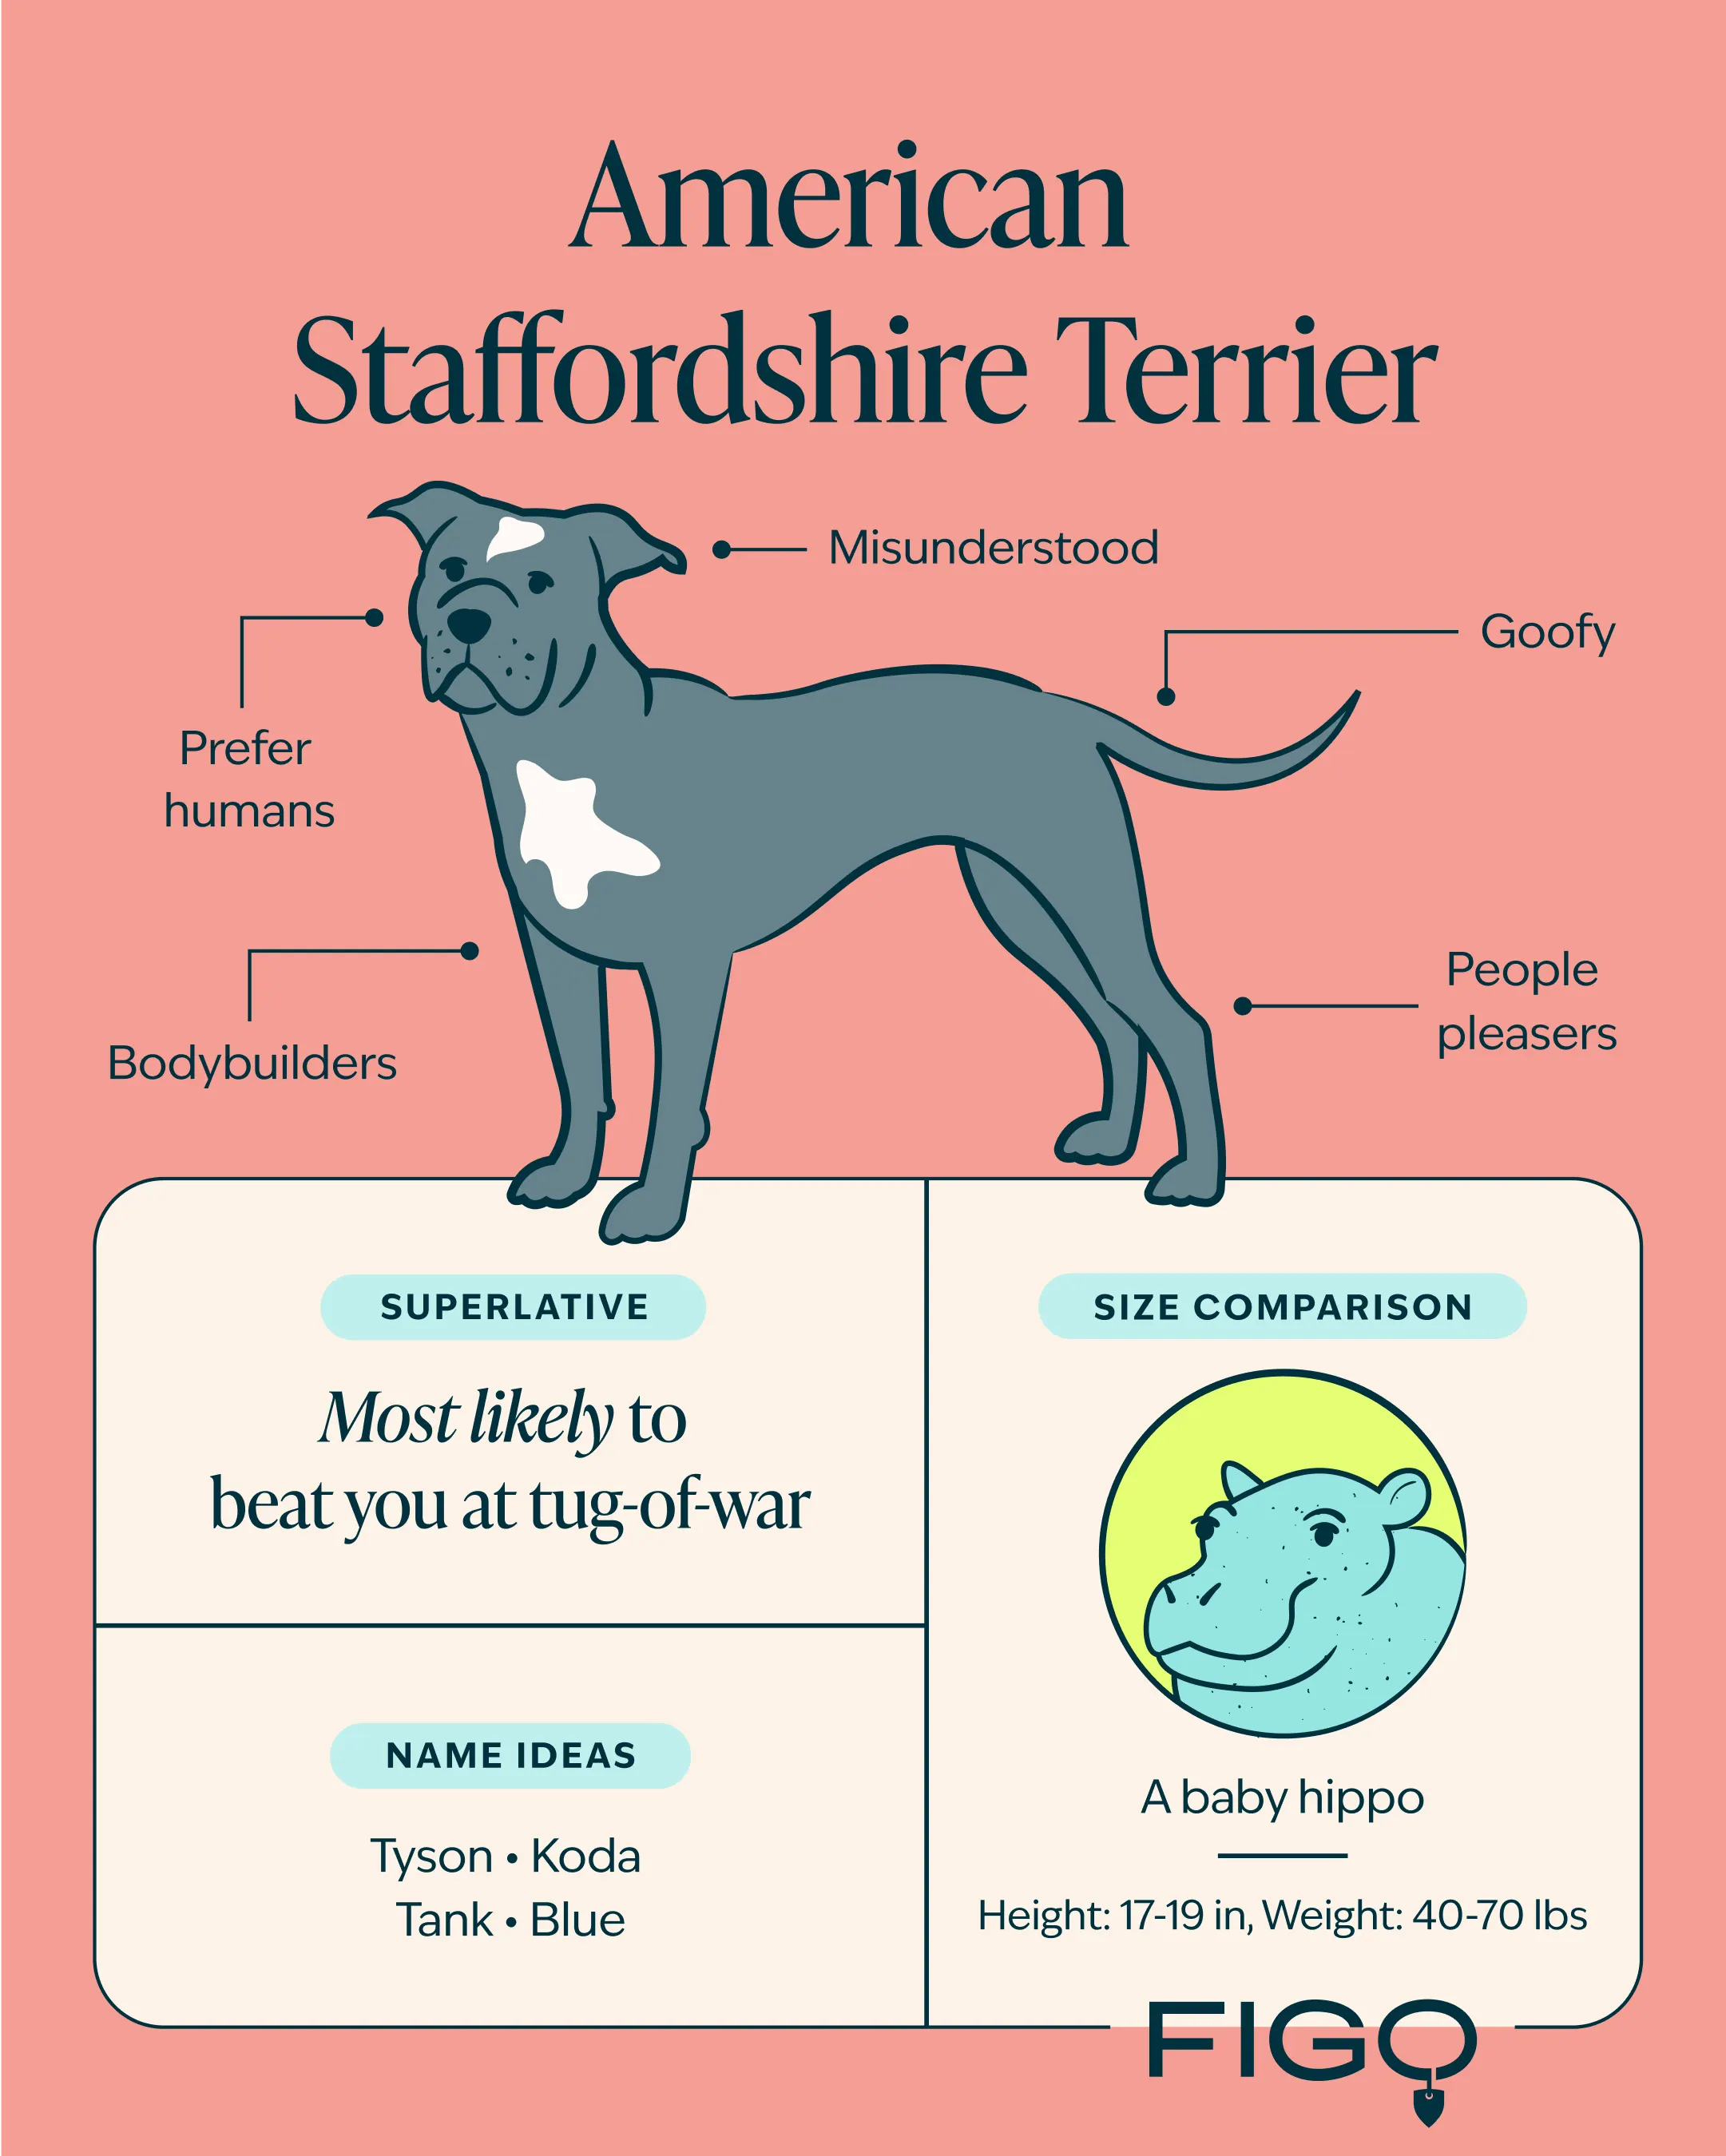 American Staffordshire Terrier Breed Guide